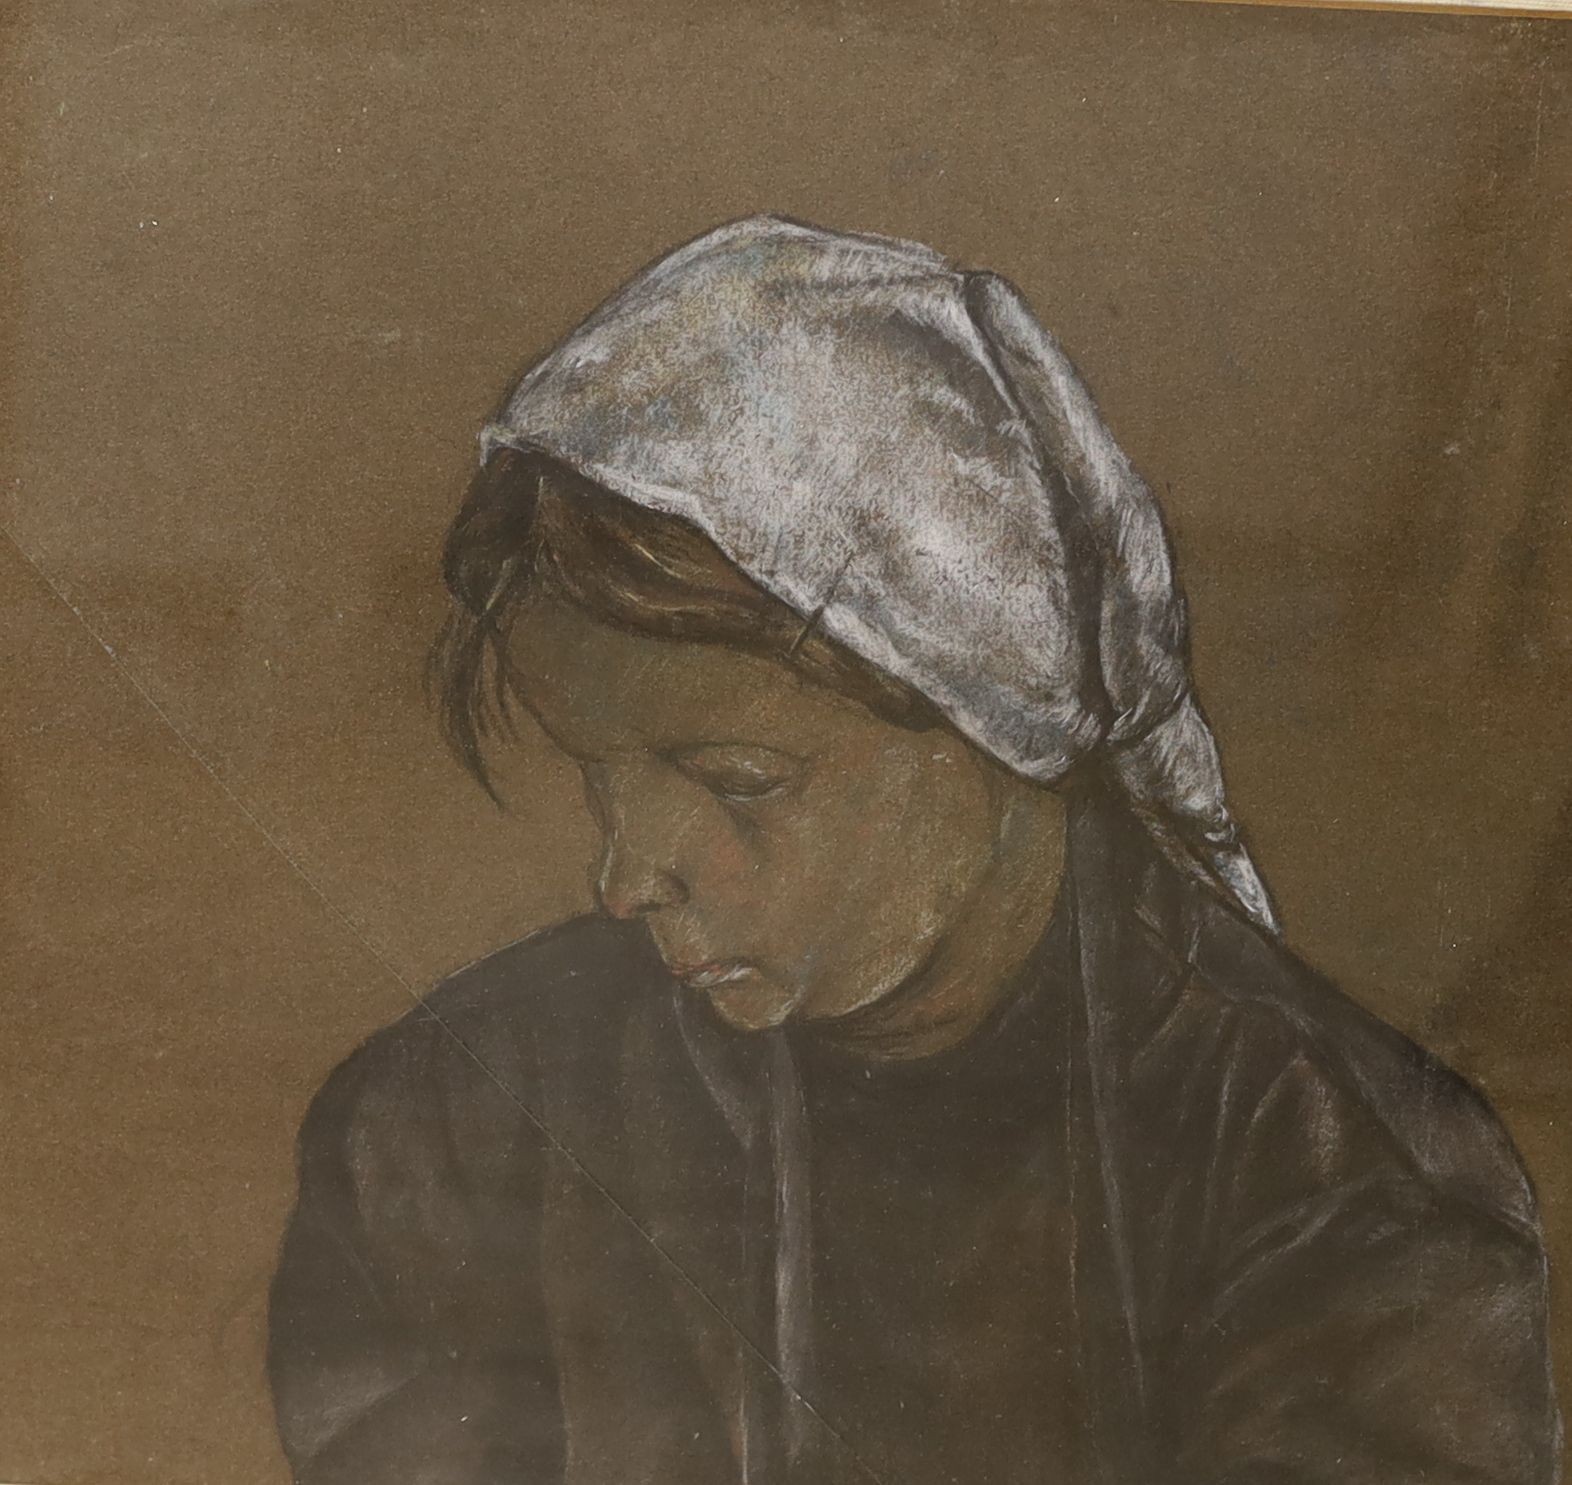 Continental School, pastel on brown paper, Study of a woman wearing a head scarf, 33 x 37cm and a late Victorian drawing of a child artist, 38 x 32cm